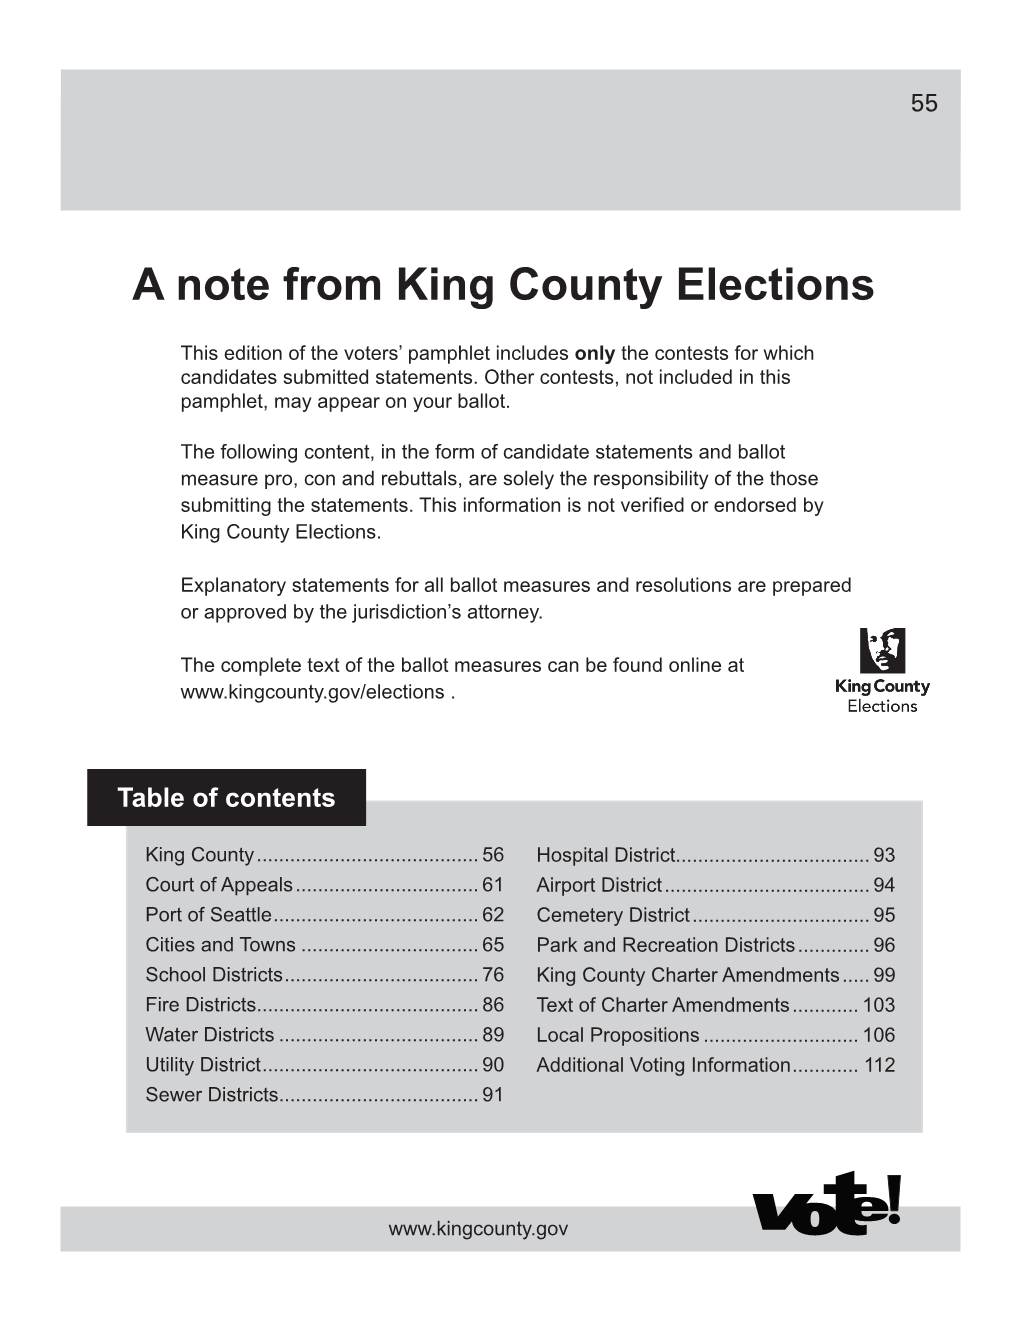 A Note from King County Elections